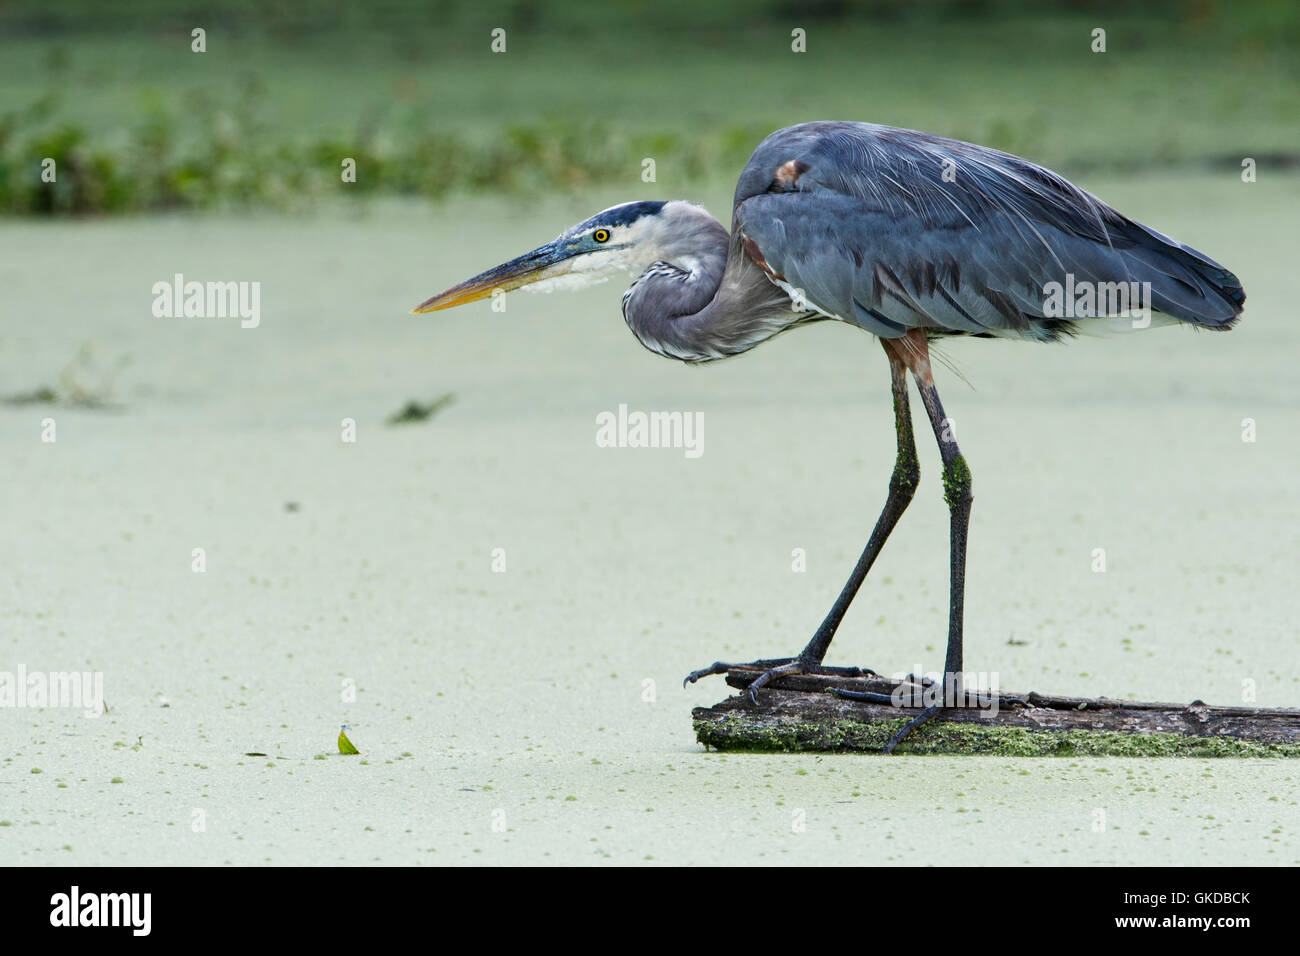 Great Blue Heron (Ardea herodias) searching for food, Brazos Bend State Park, Texas, USA Stock Photo